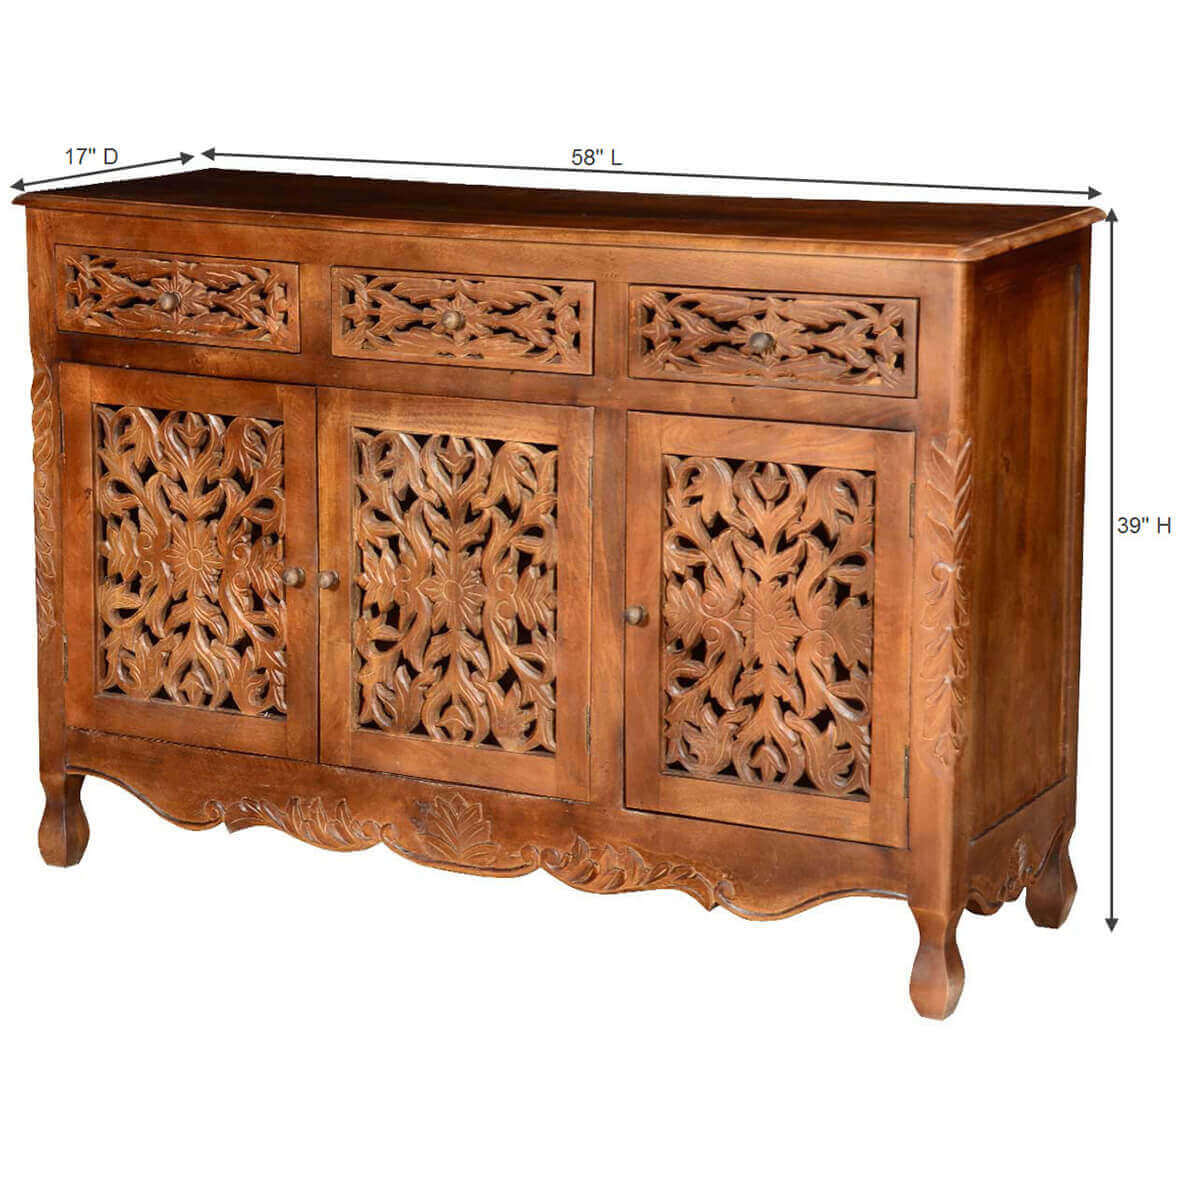 Handmade Hand Carved Buffet Table in Natural Color | Wooden Three Doors and Drawers Sideboard Buffet & Sideboard - Bone Inlay Furnitures